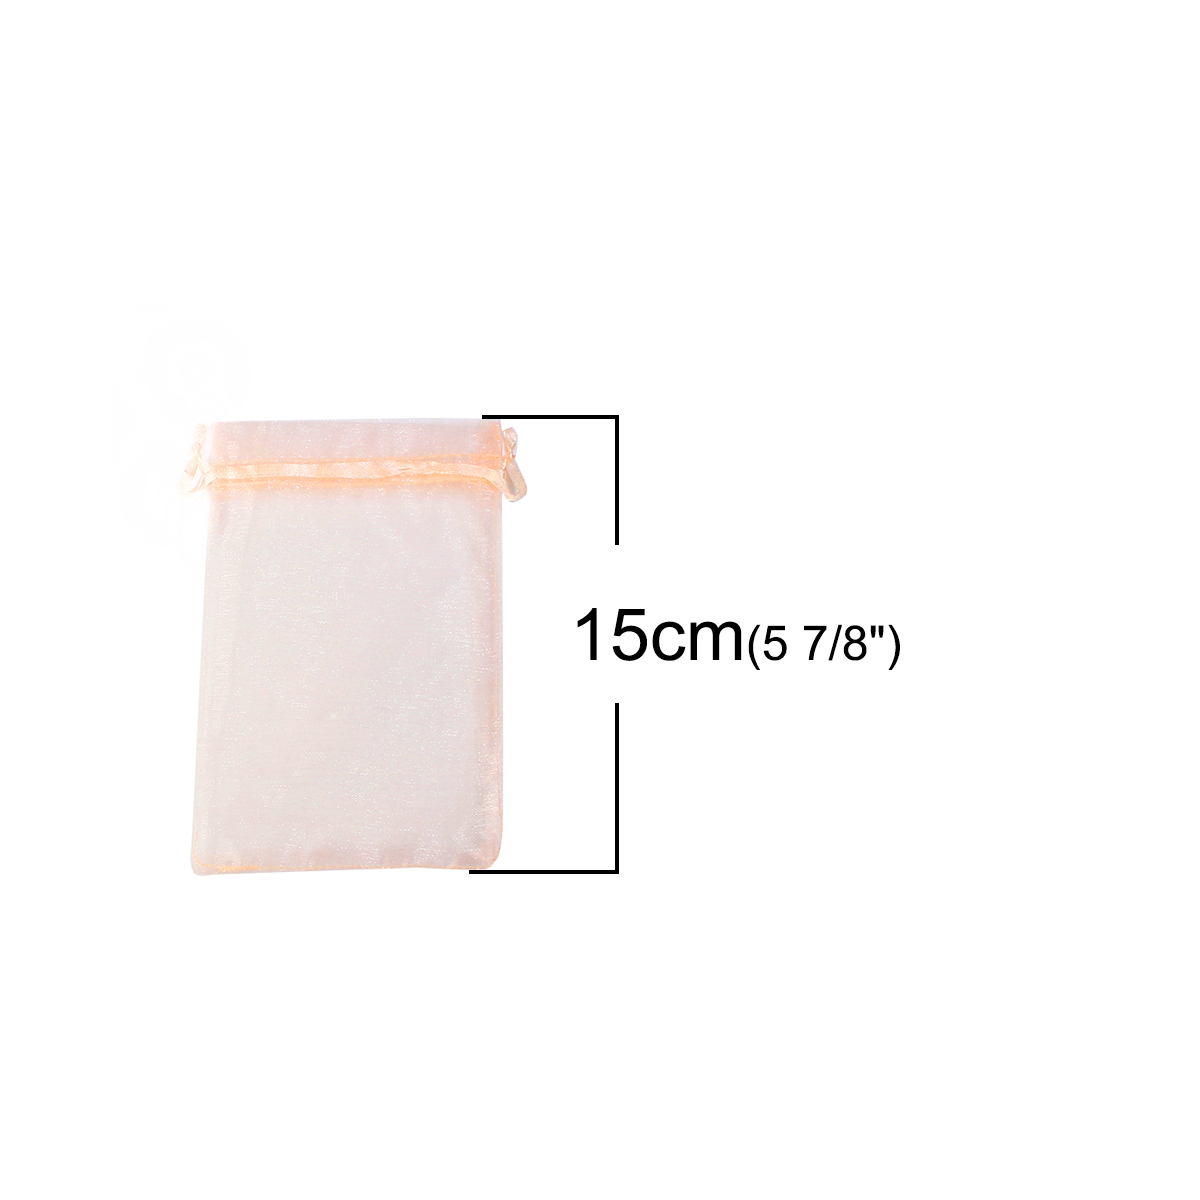 Picture of Wedding Gift Organza Jewelry Bags Drawstring Rectangle Orange Pink (Usable Space: 13x10cm) 15cm(5 7/8") x 10cm(3 7/8"), 20 PCs